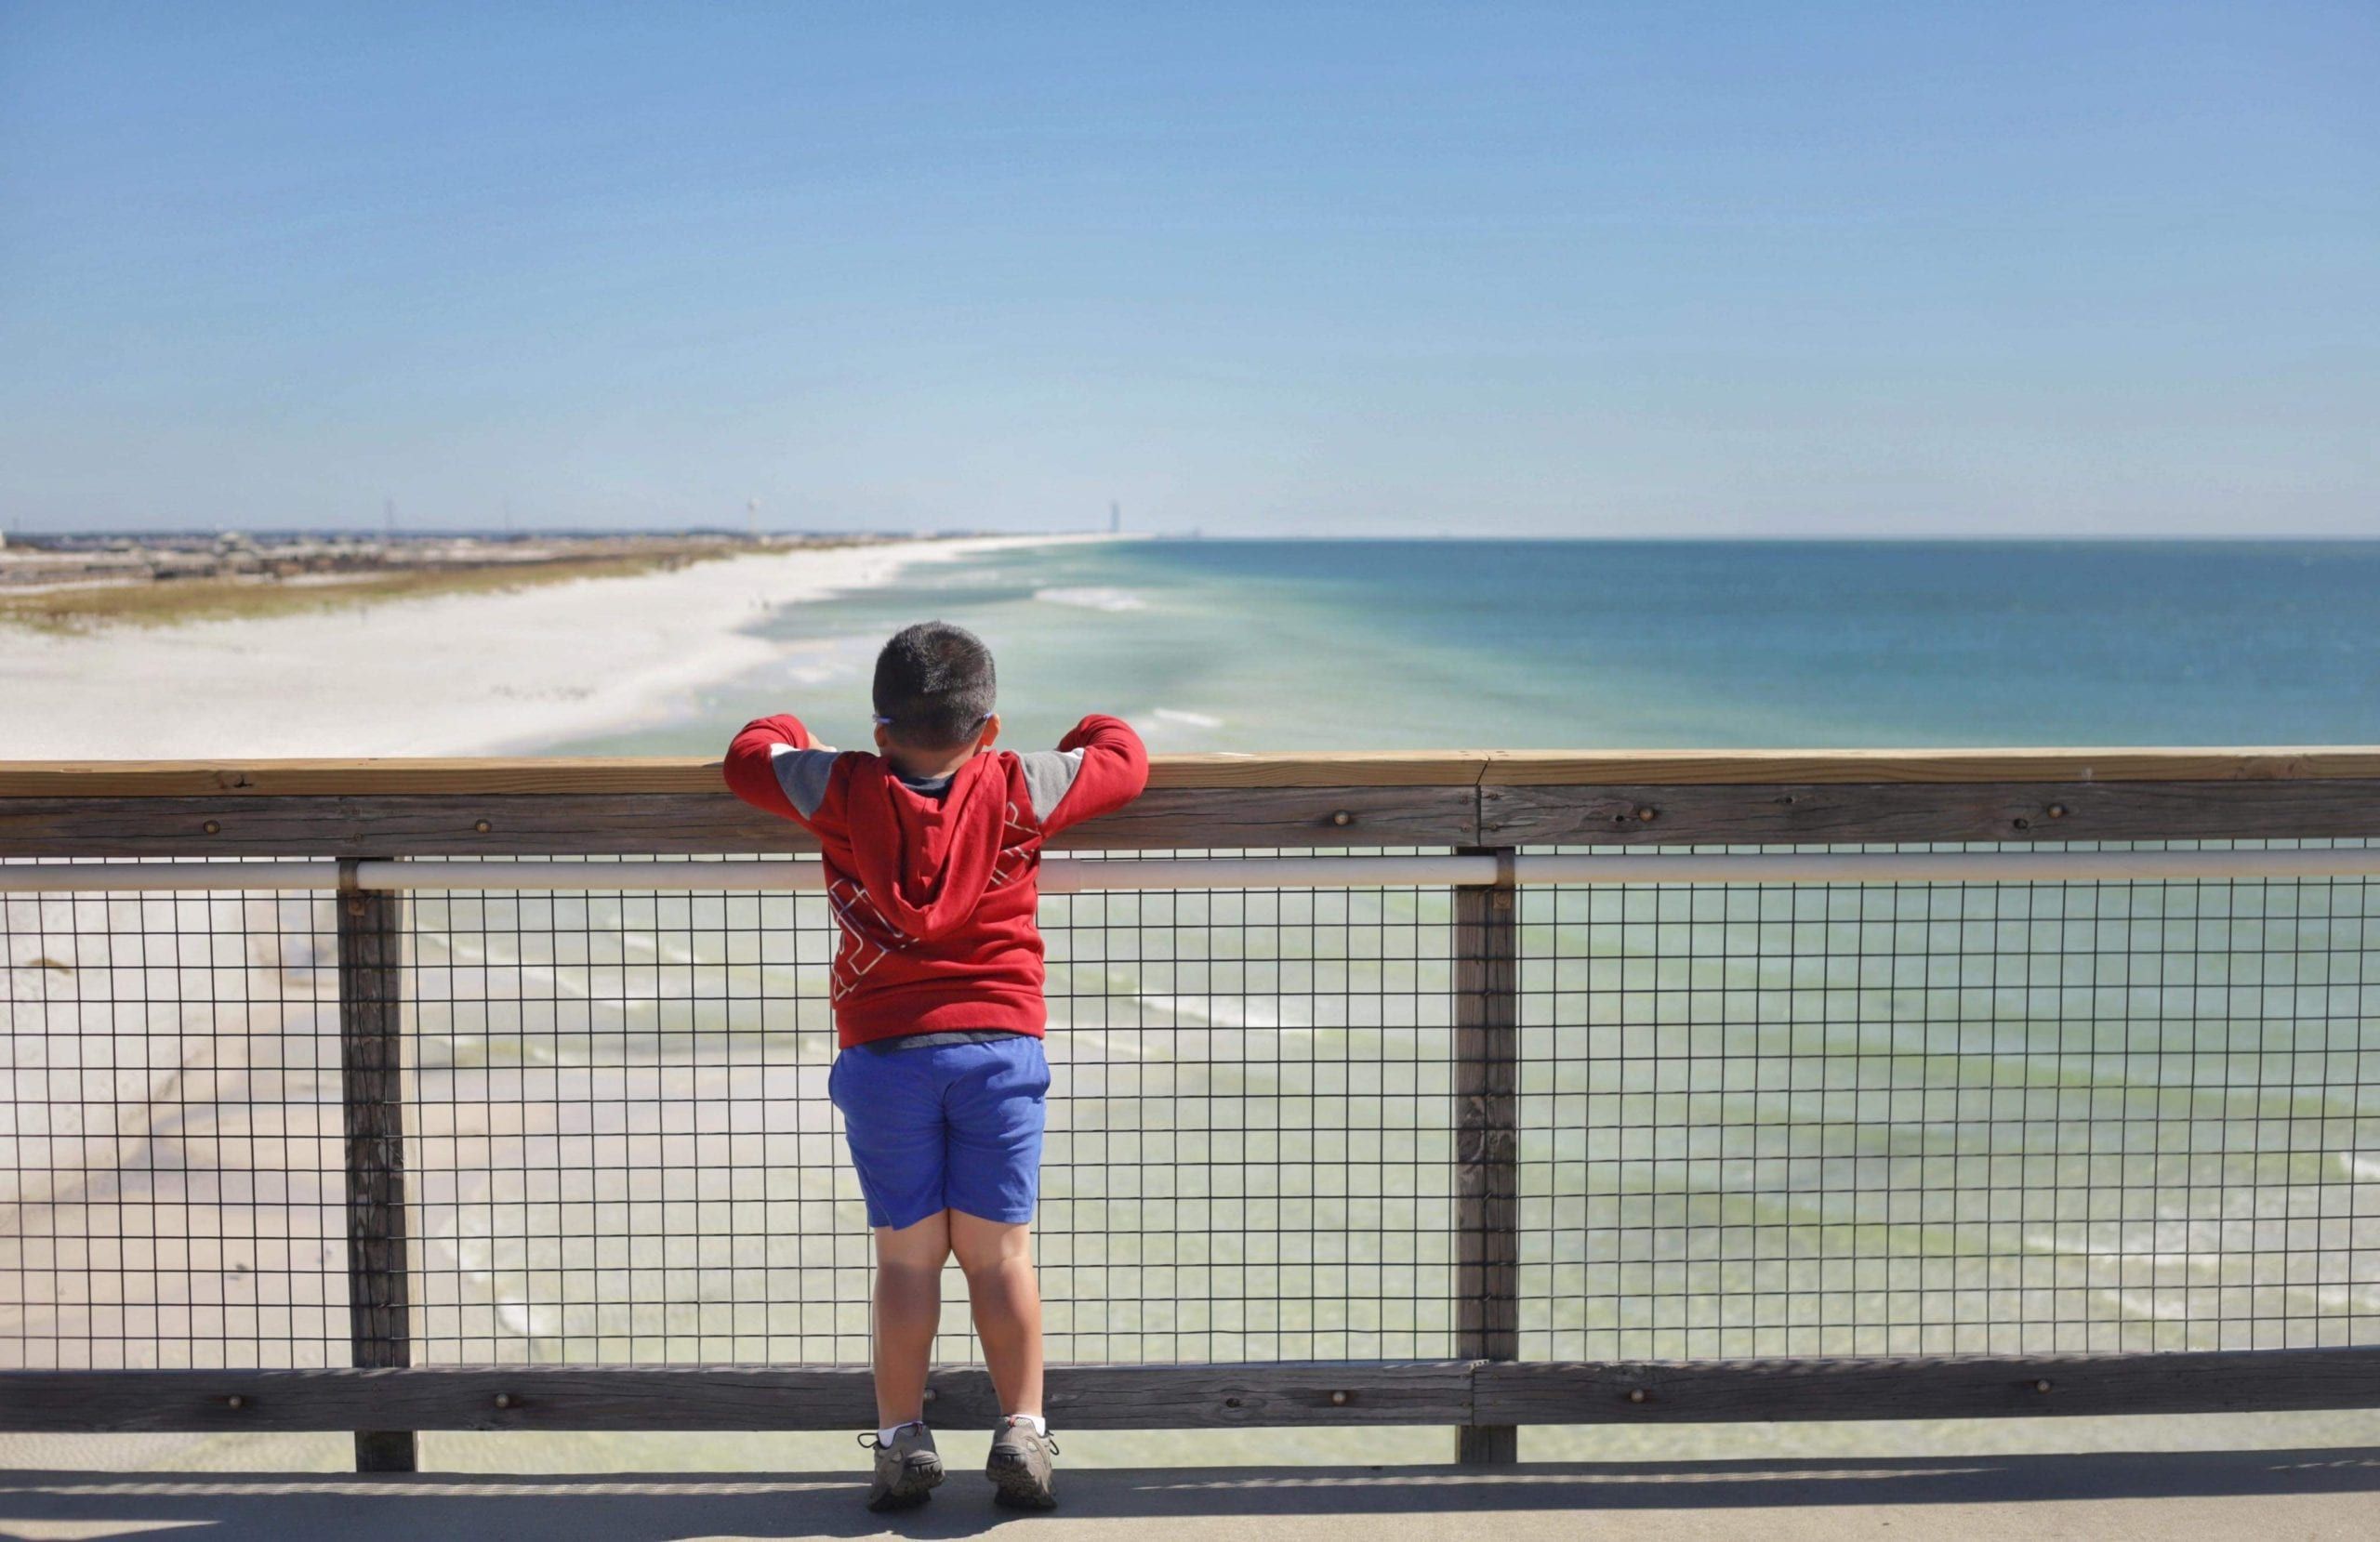 You know what's better than a picture of beautiful Navarre Beach? A picture of a cute kid on beautiful Navarre Beach. Today's Photo of the Day is submitted by Rev Llanes. If you have any cute pictures of your kids, make sure to submit them to editor@navarrepress.com for Photo of the Day.